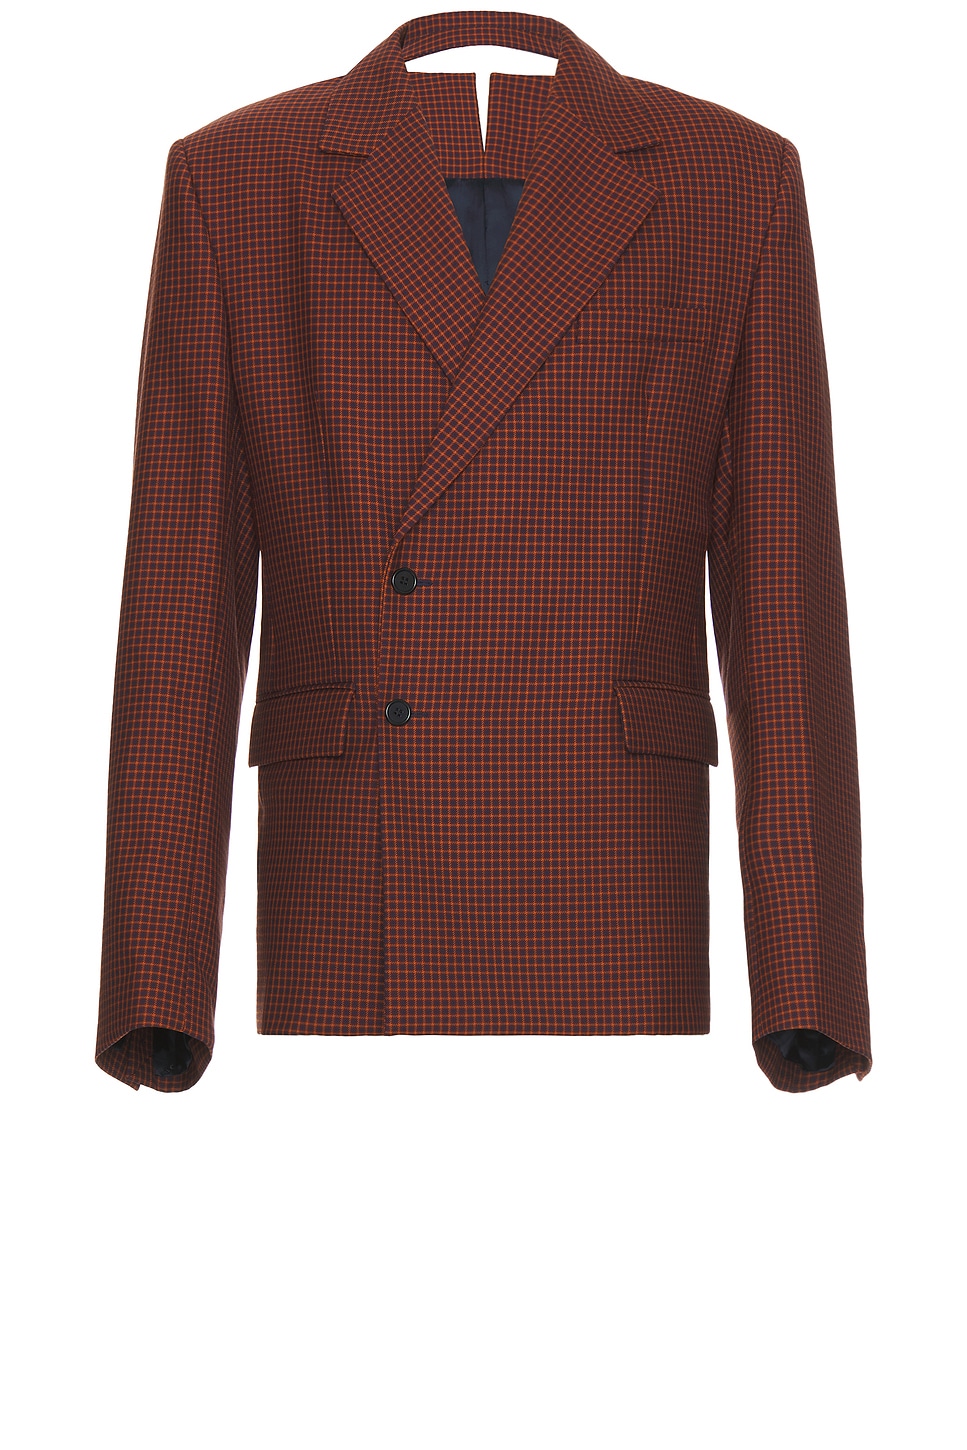 Image 1 of BOTTER Front Collar Reverse Jacket in Red Check